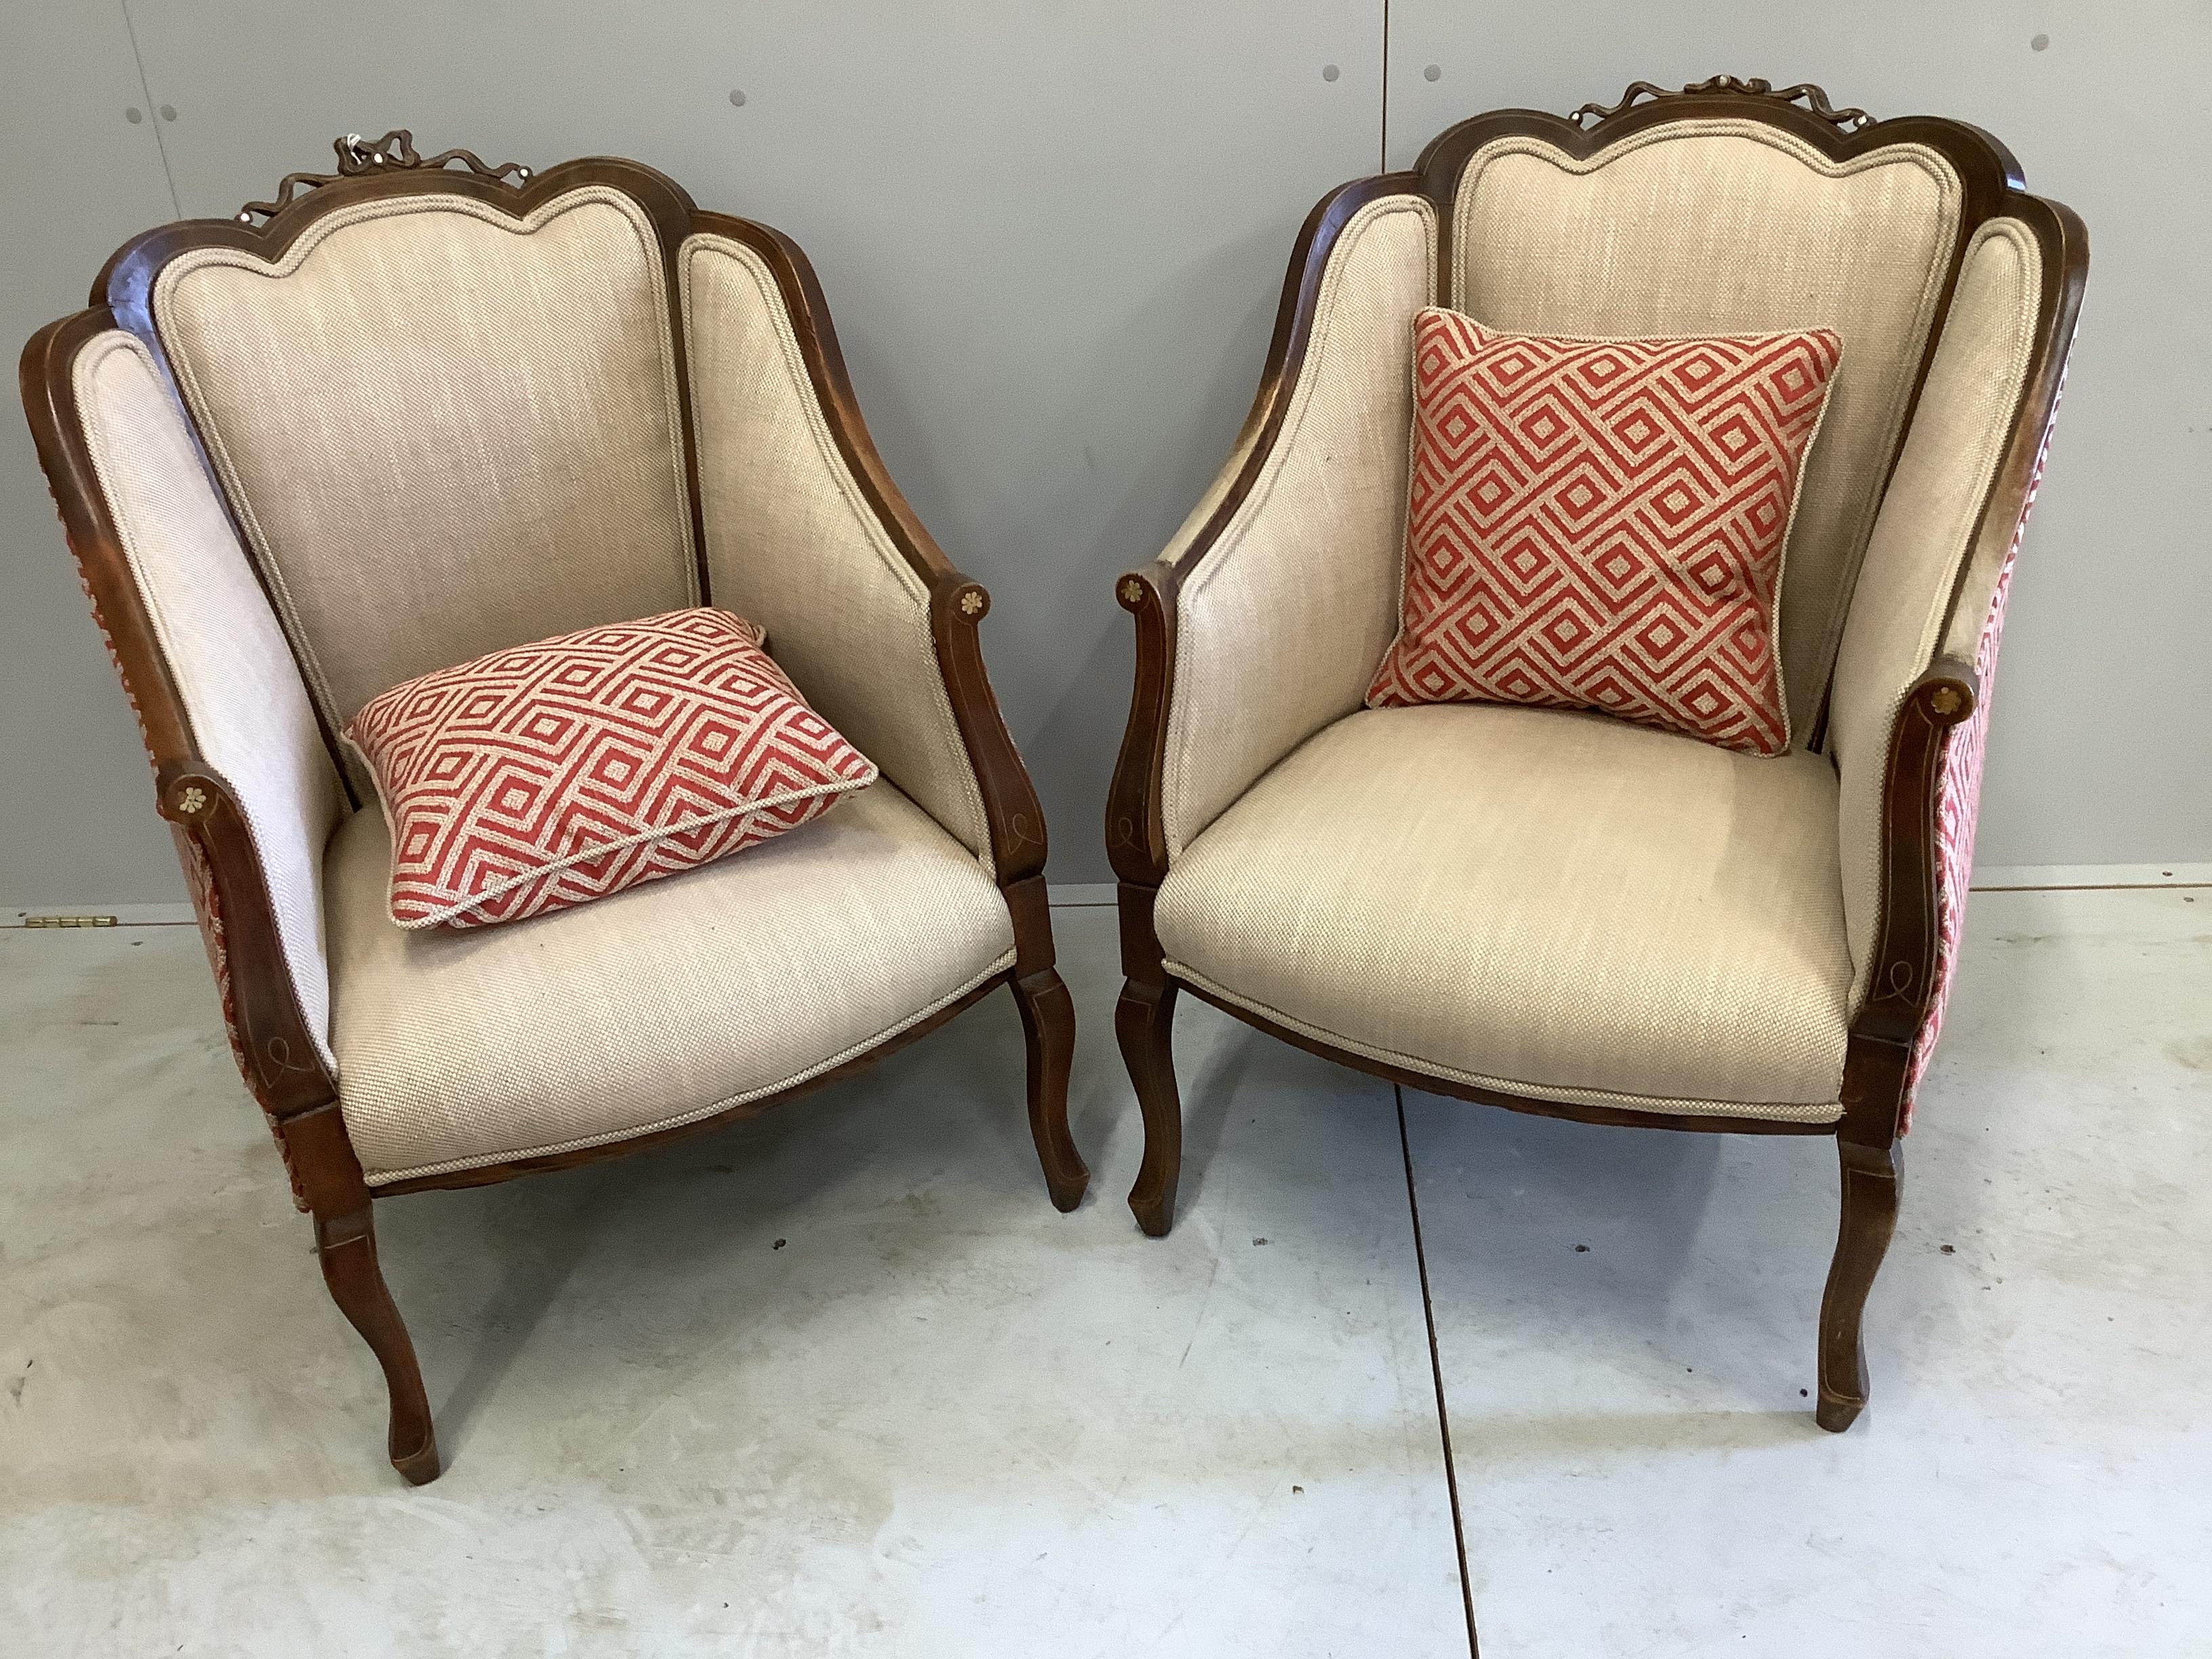 A pair of Edwardian inlaid mahogany upholstered armchairs, width 65cm, depth 66cm, height 90cm                                                                                                                              